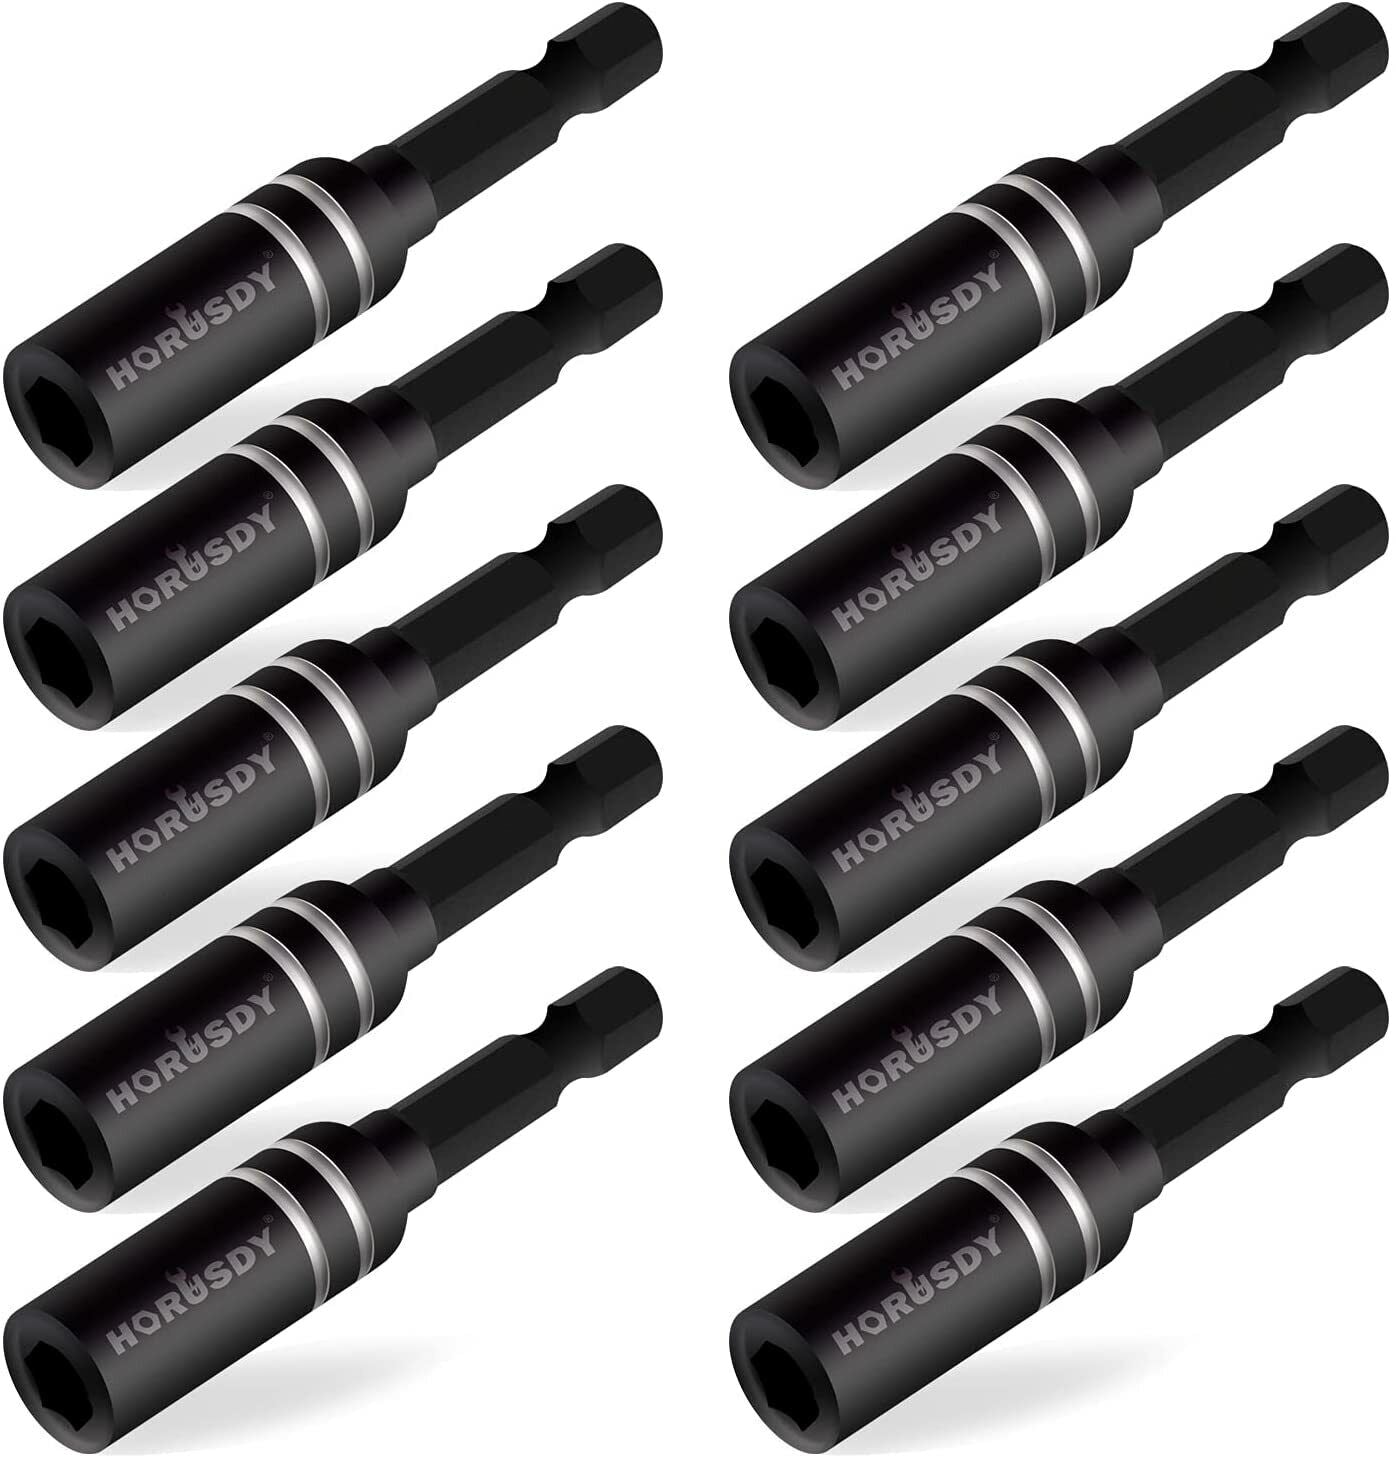 10-Piece Magnetic Extension Socket Drill Bit Holders with Universal 1/4" Hex Shanks for Secure Bit Retention